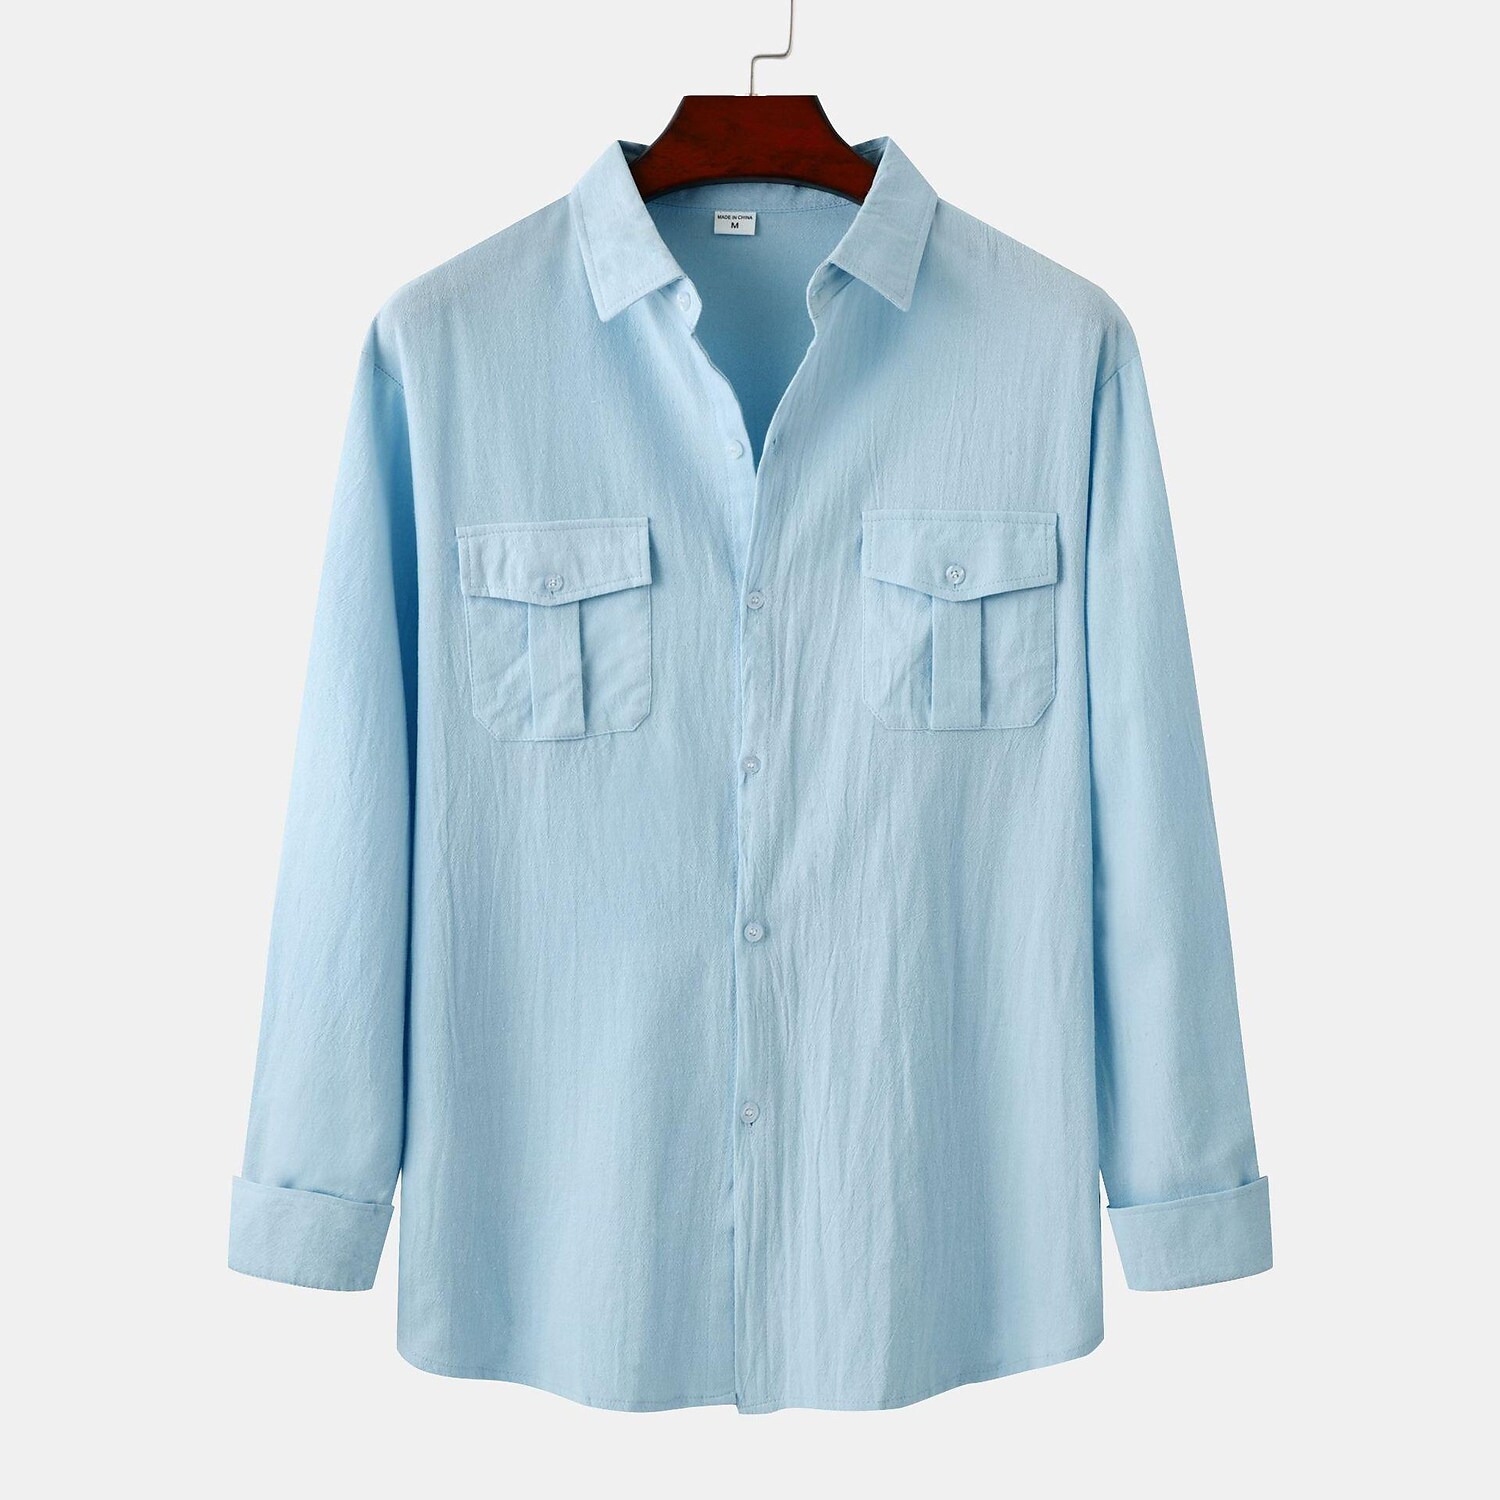 Men's Double Pocket Cotton and Linen Solid Color Long Sleeve Shirt-poisonstreetwear.com